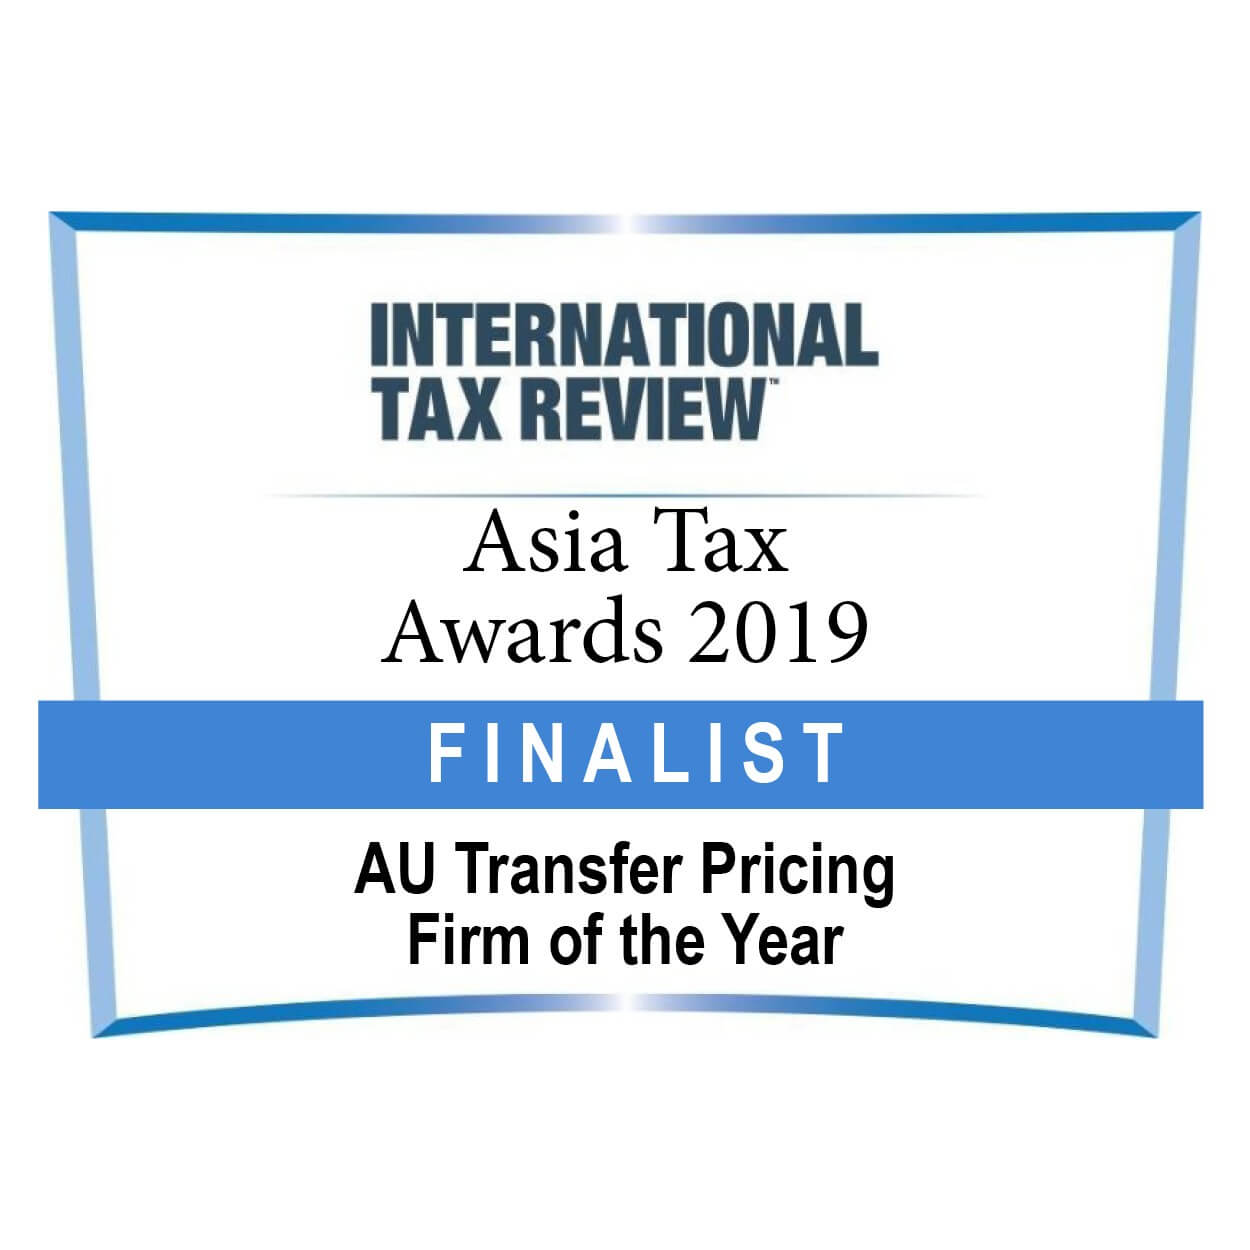 AU TP firm of the Year Asia Tax Awards FINALIST 2019